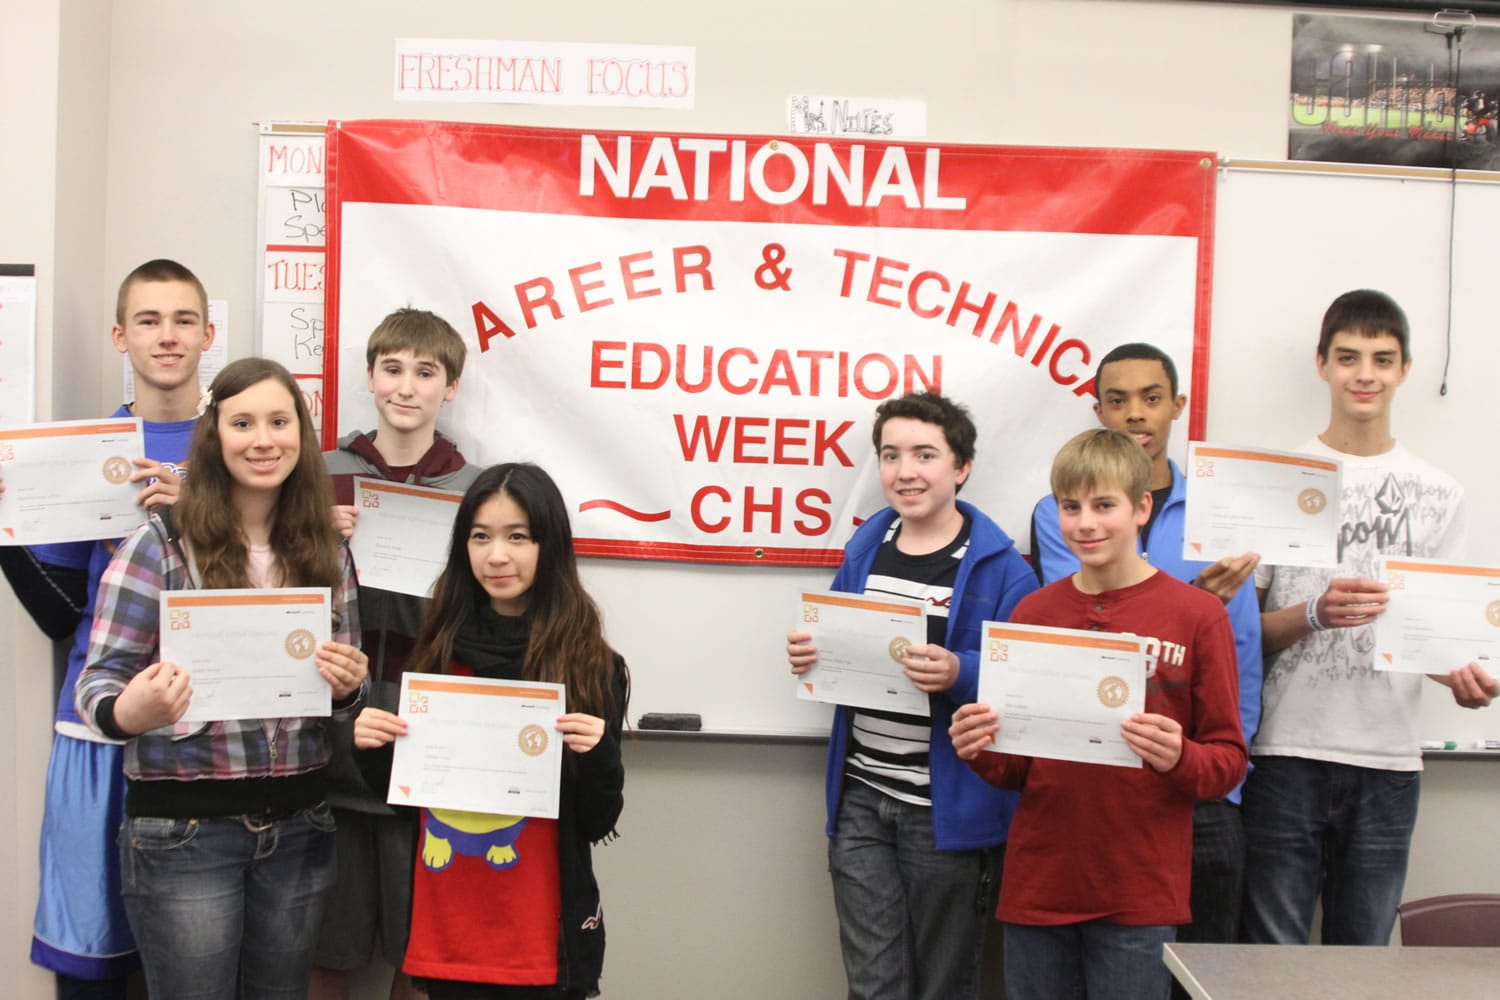 Contributed photo
Several ninth-grade students earned PowerPoint certification at Camas High School. They are (from left): LeFore McKinley, Amber Weese, Skyler Wade, Juliana Chau, Matthew Clay, Alec Gantar, William (Isaiah) Ephraim and Val Kovalenko. Not pictured: Talon Edmiston and Bayley Stevenson.